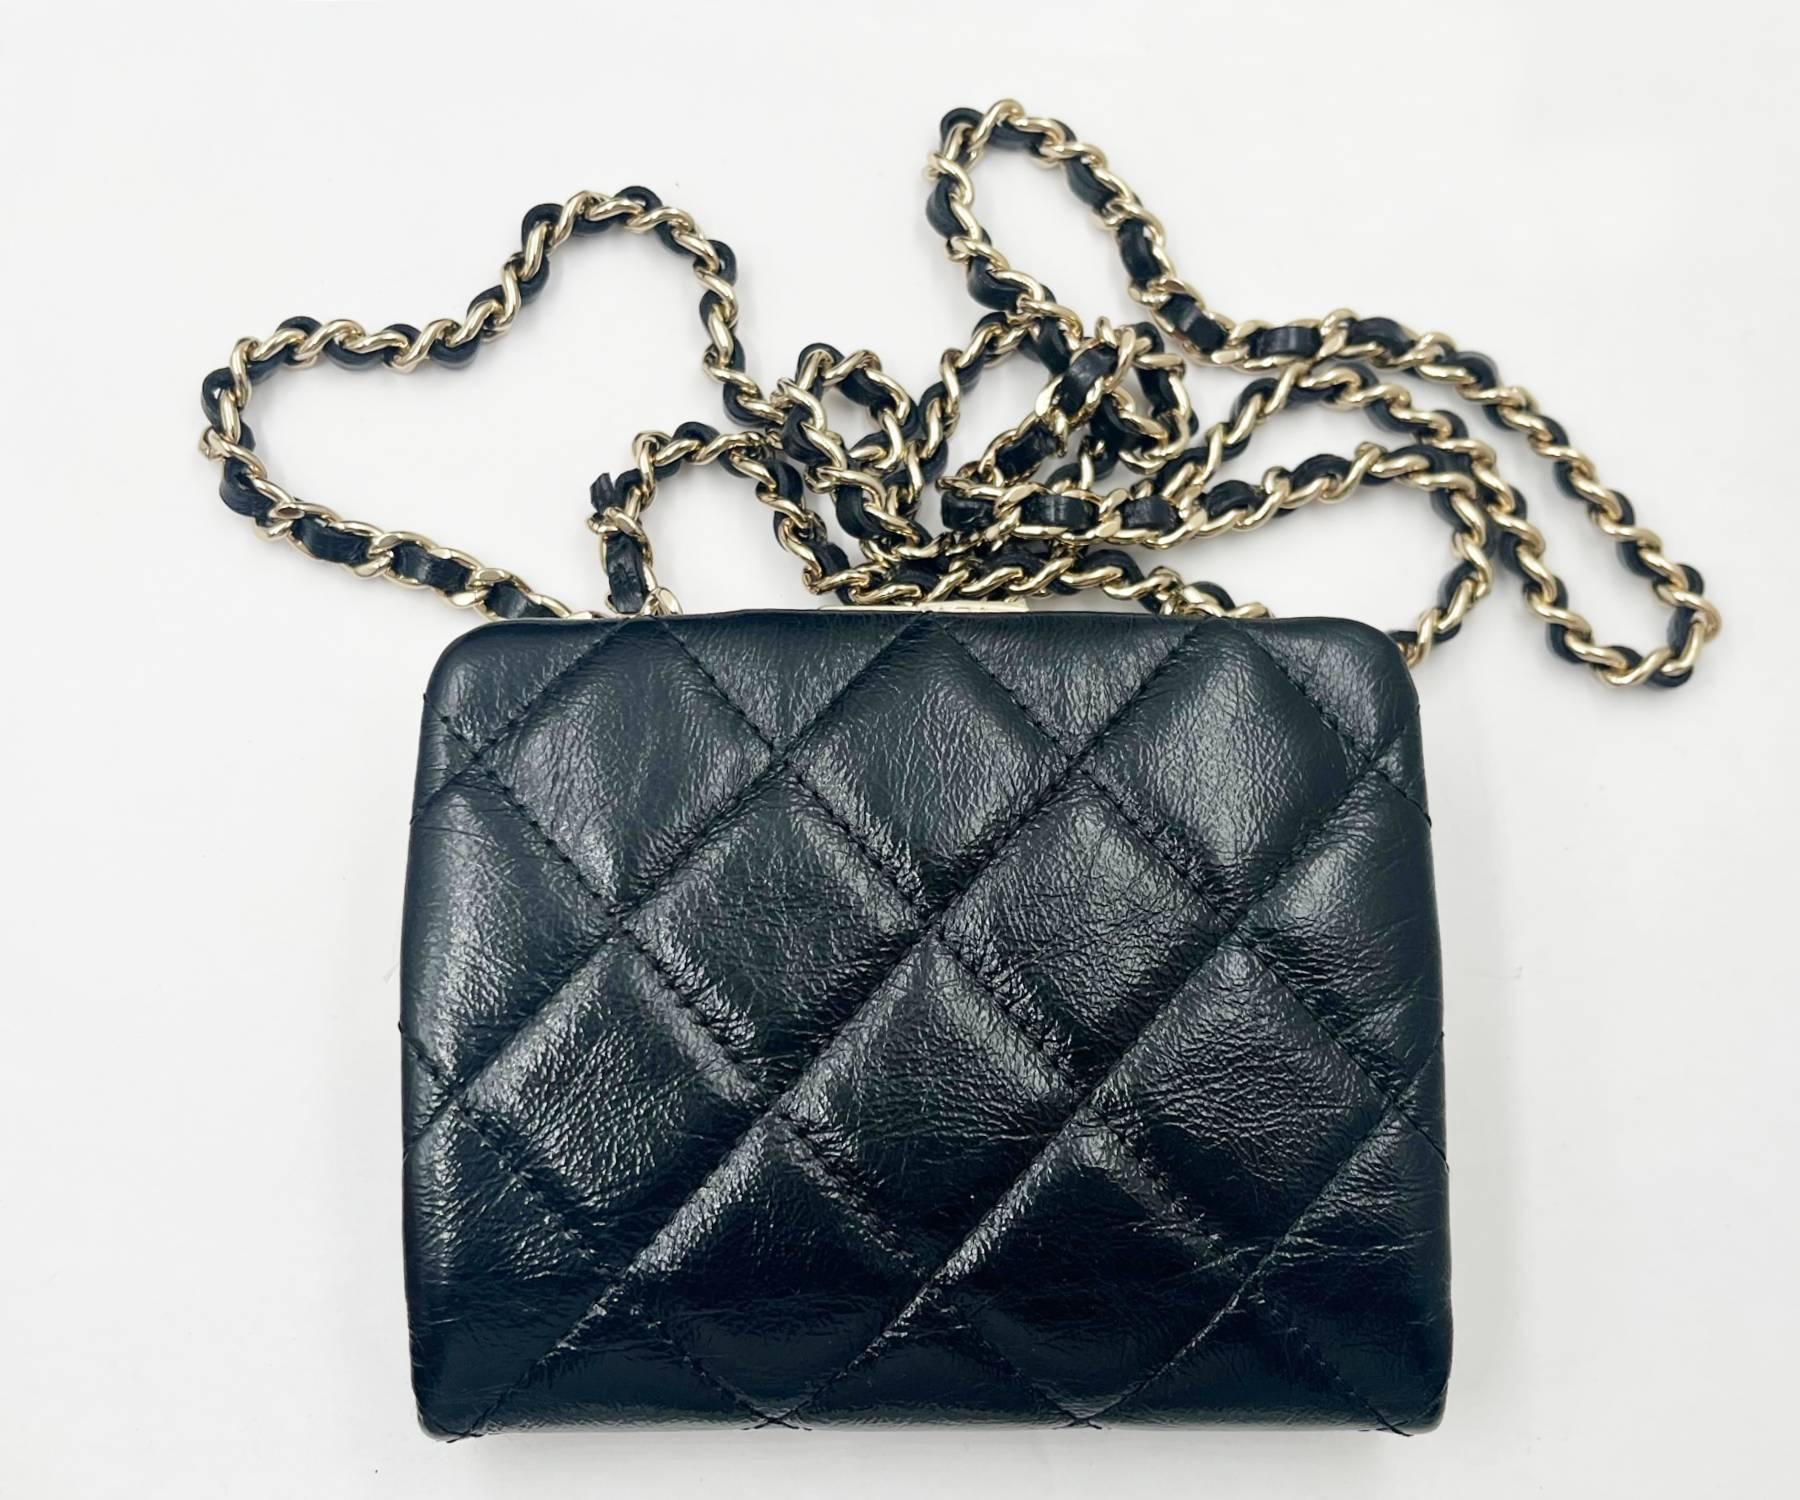 Chanel Brand New Black Crinkled Leather Coin Purse Crossbody Bag  In New Condition For Sale In Pasadena, CA